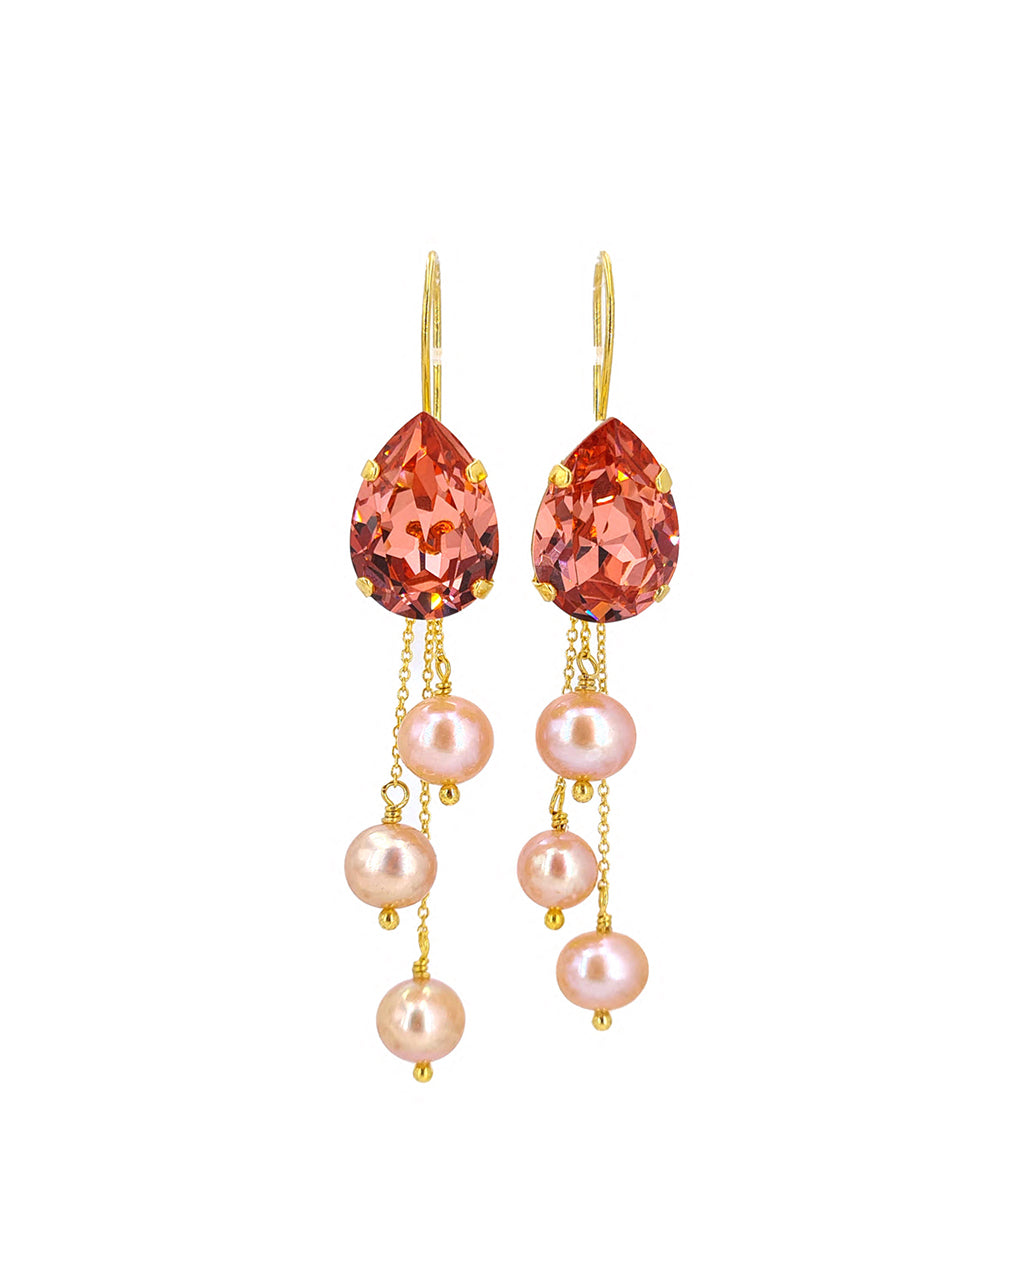 Transformable Elegance: Hot Pink Barbie Edition Crystal and Pearl Earrings | Modern Chic Pearl Jewelry